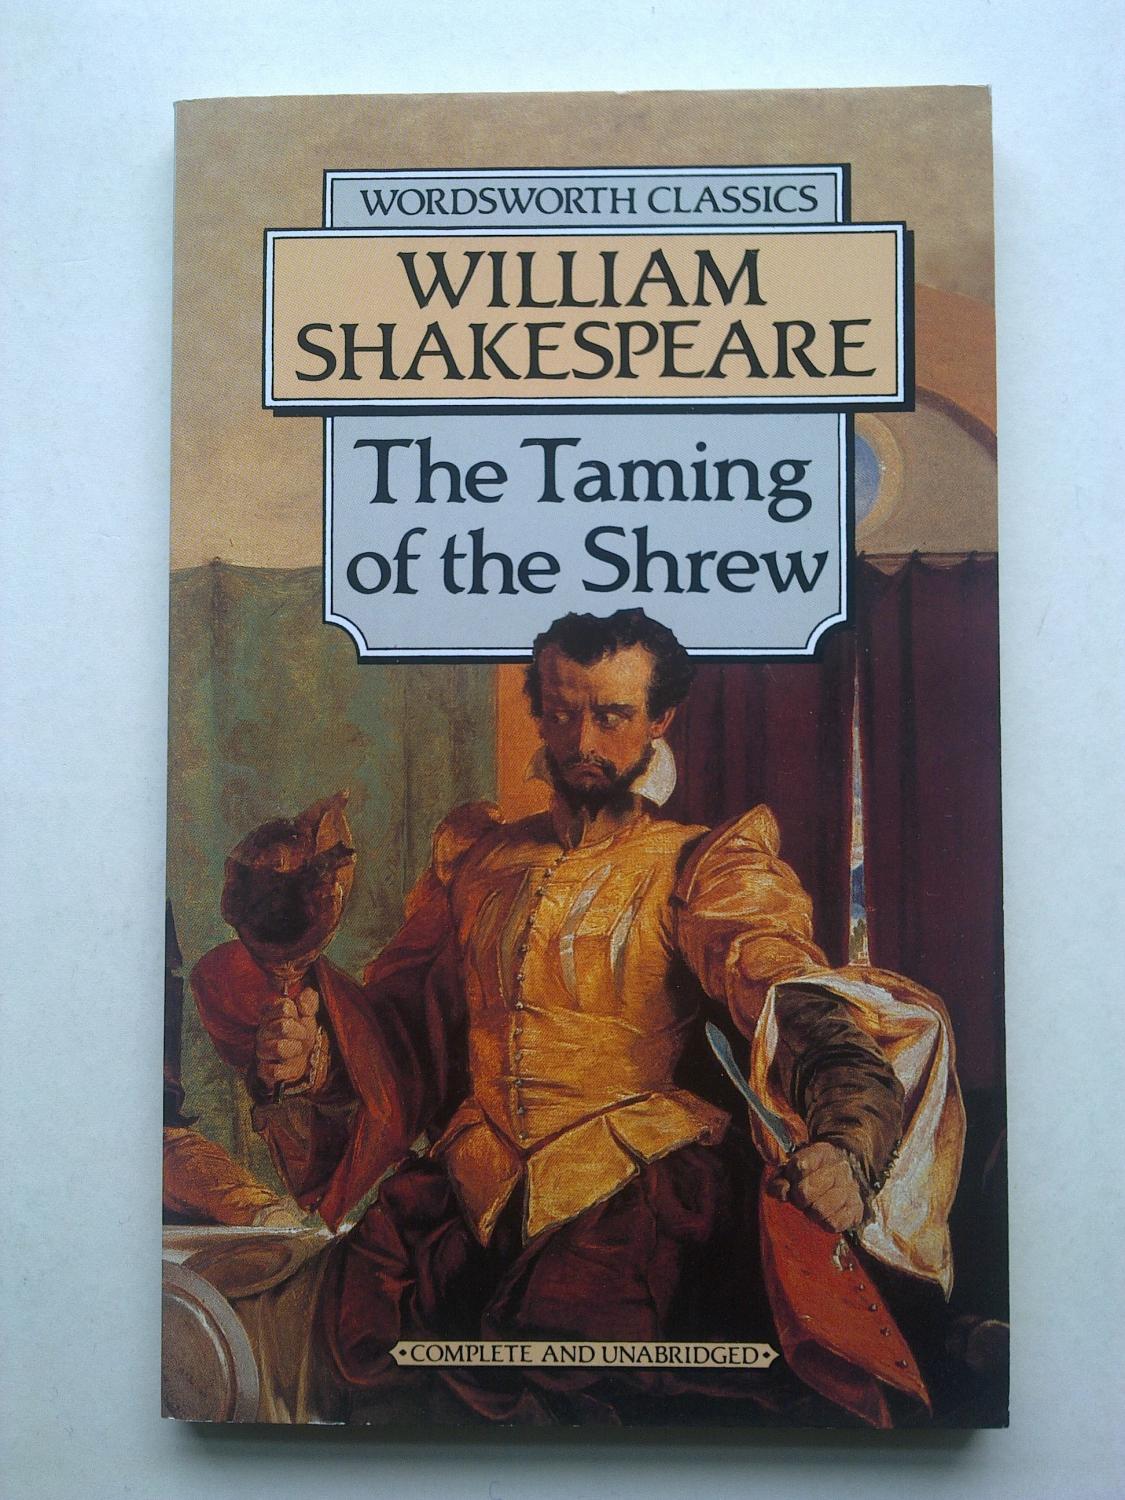 William:　(1993)　Soft　Edition　by　Of　1st　The　SHAKESPEARE,　cover　Shrew　New　Taming　The　Bookenastics